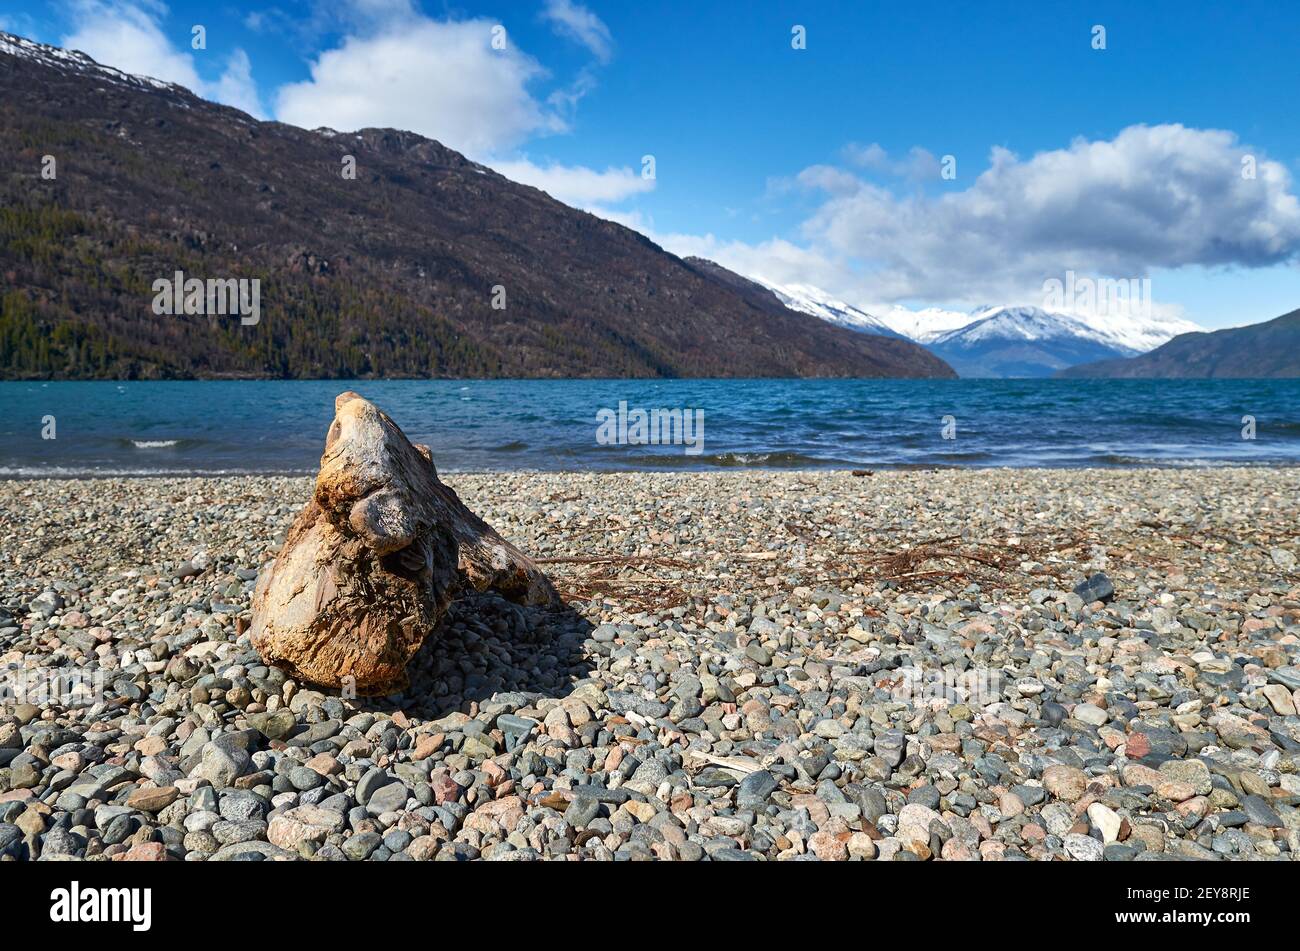 View of the Puelo lake in Chubut, patagonia Argentina, on spring day. Beautiful landscape with snowy mountains and clouds on the blue sky. Stock Photo